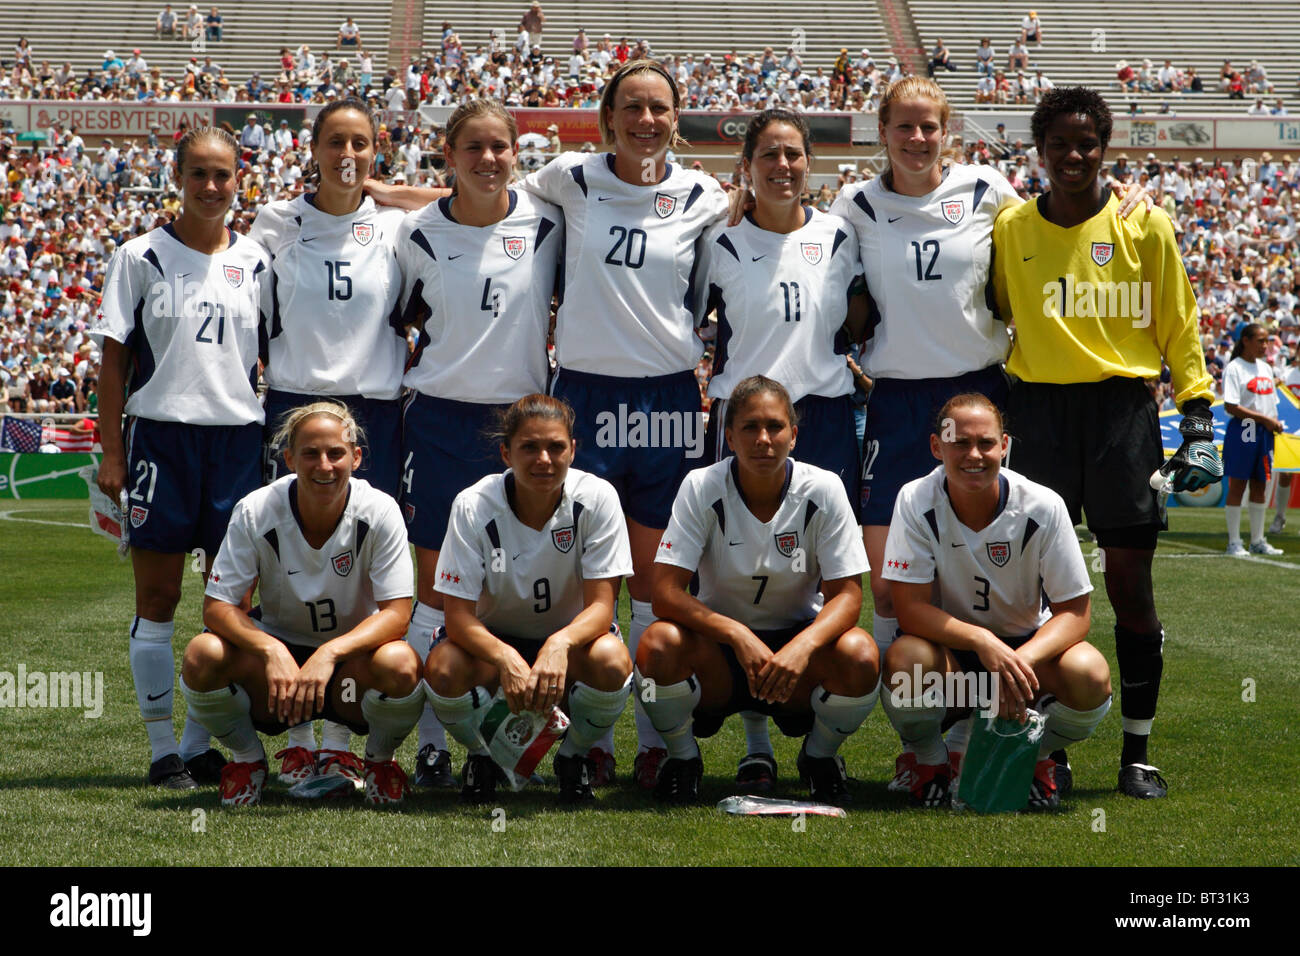 The United States Women's National Team lines up prior to an international soccer friendly against Mexico (see details in desc). Stock Photo